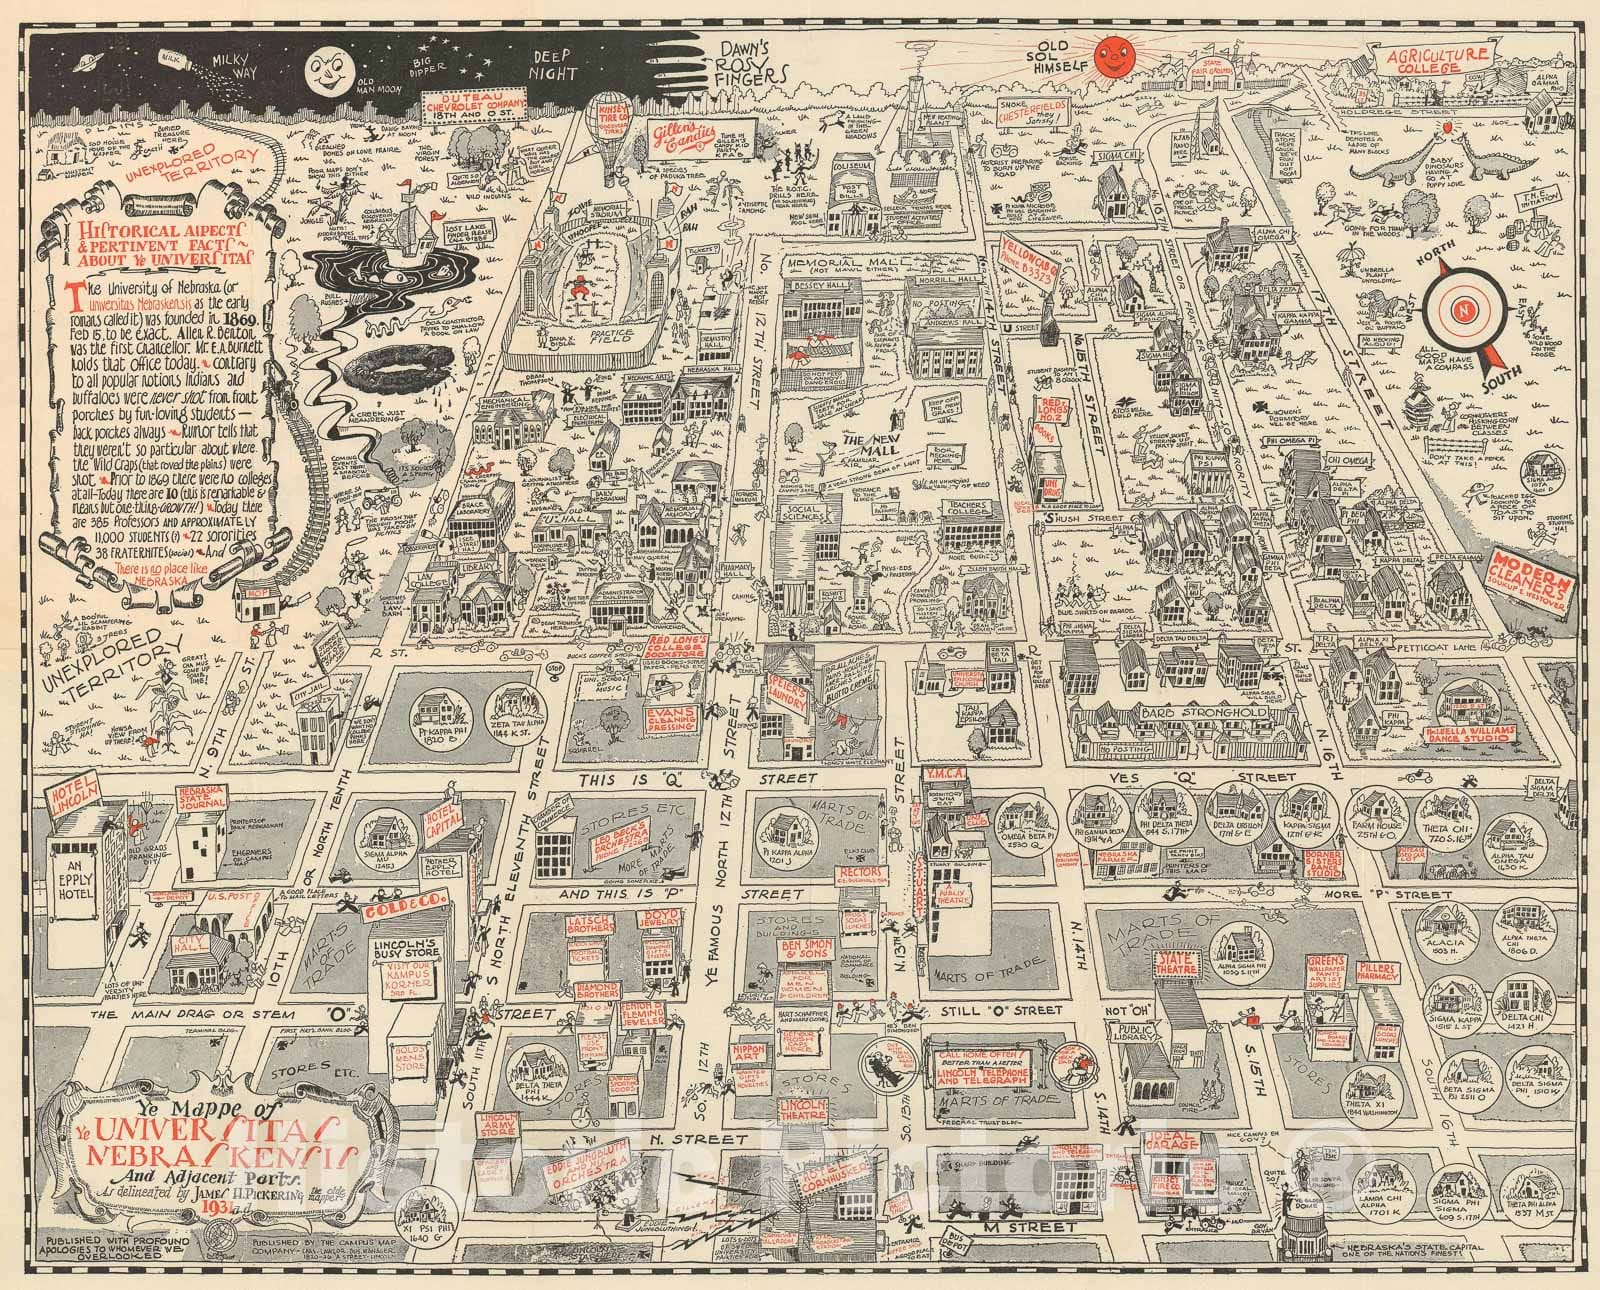 Historic Map : Pictorial Map of The University of Nebraska, Pickering Comical, 1931, Vintage Wall Art